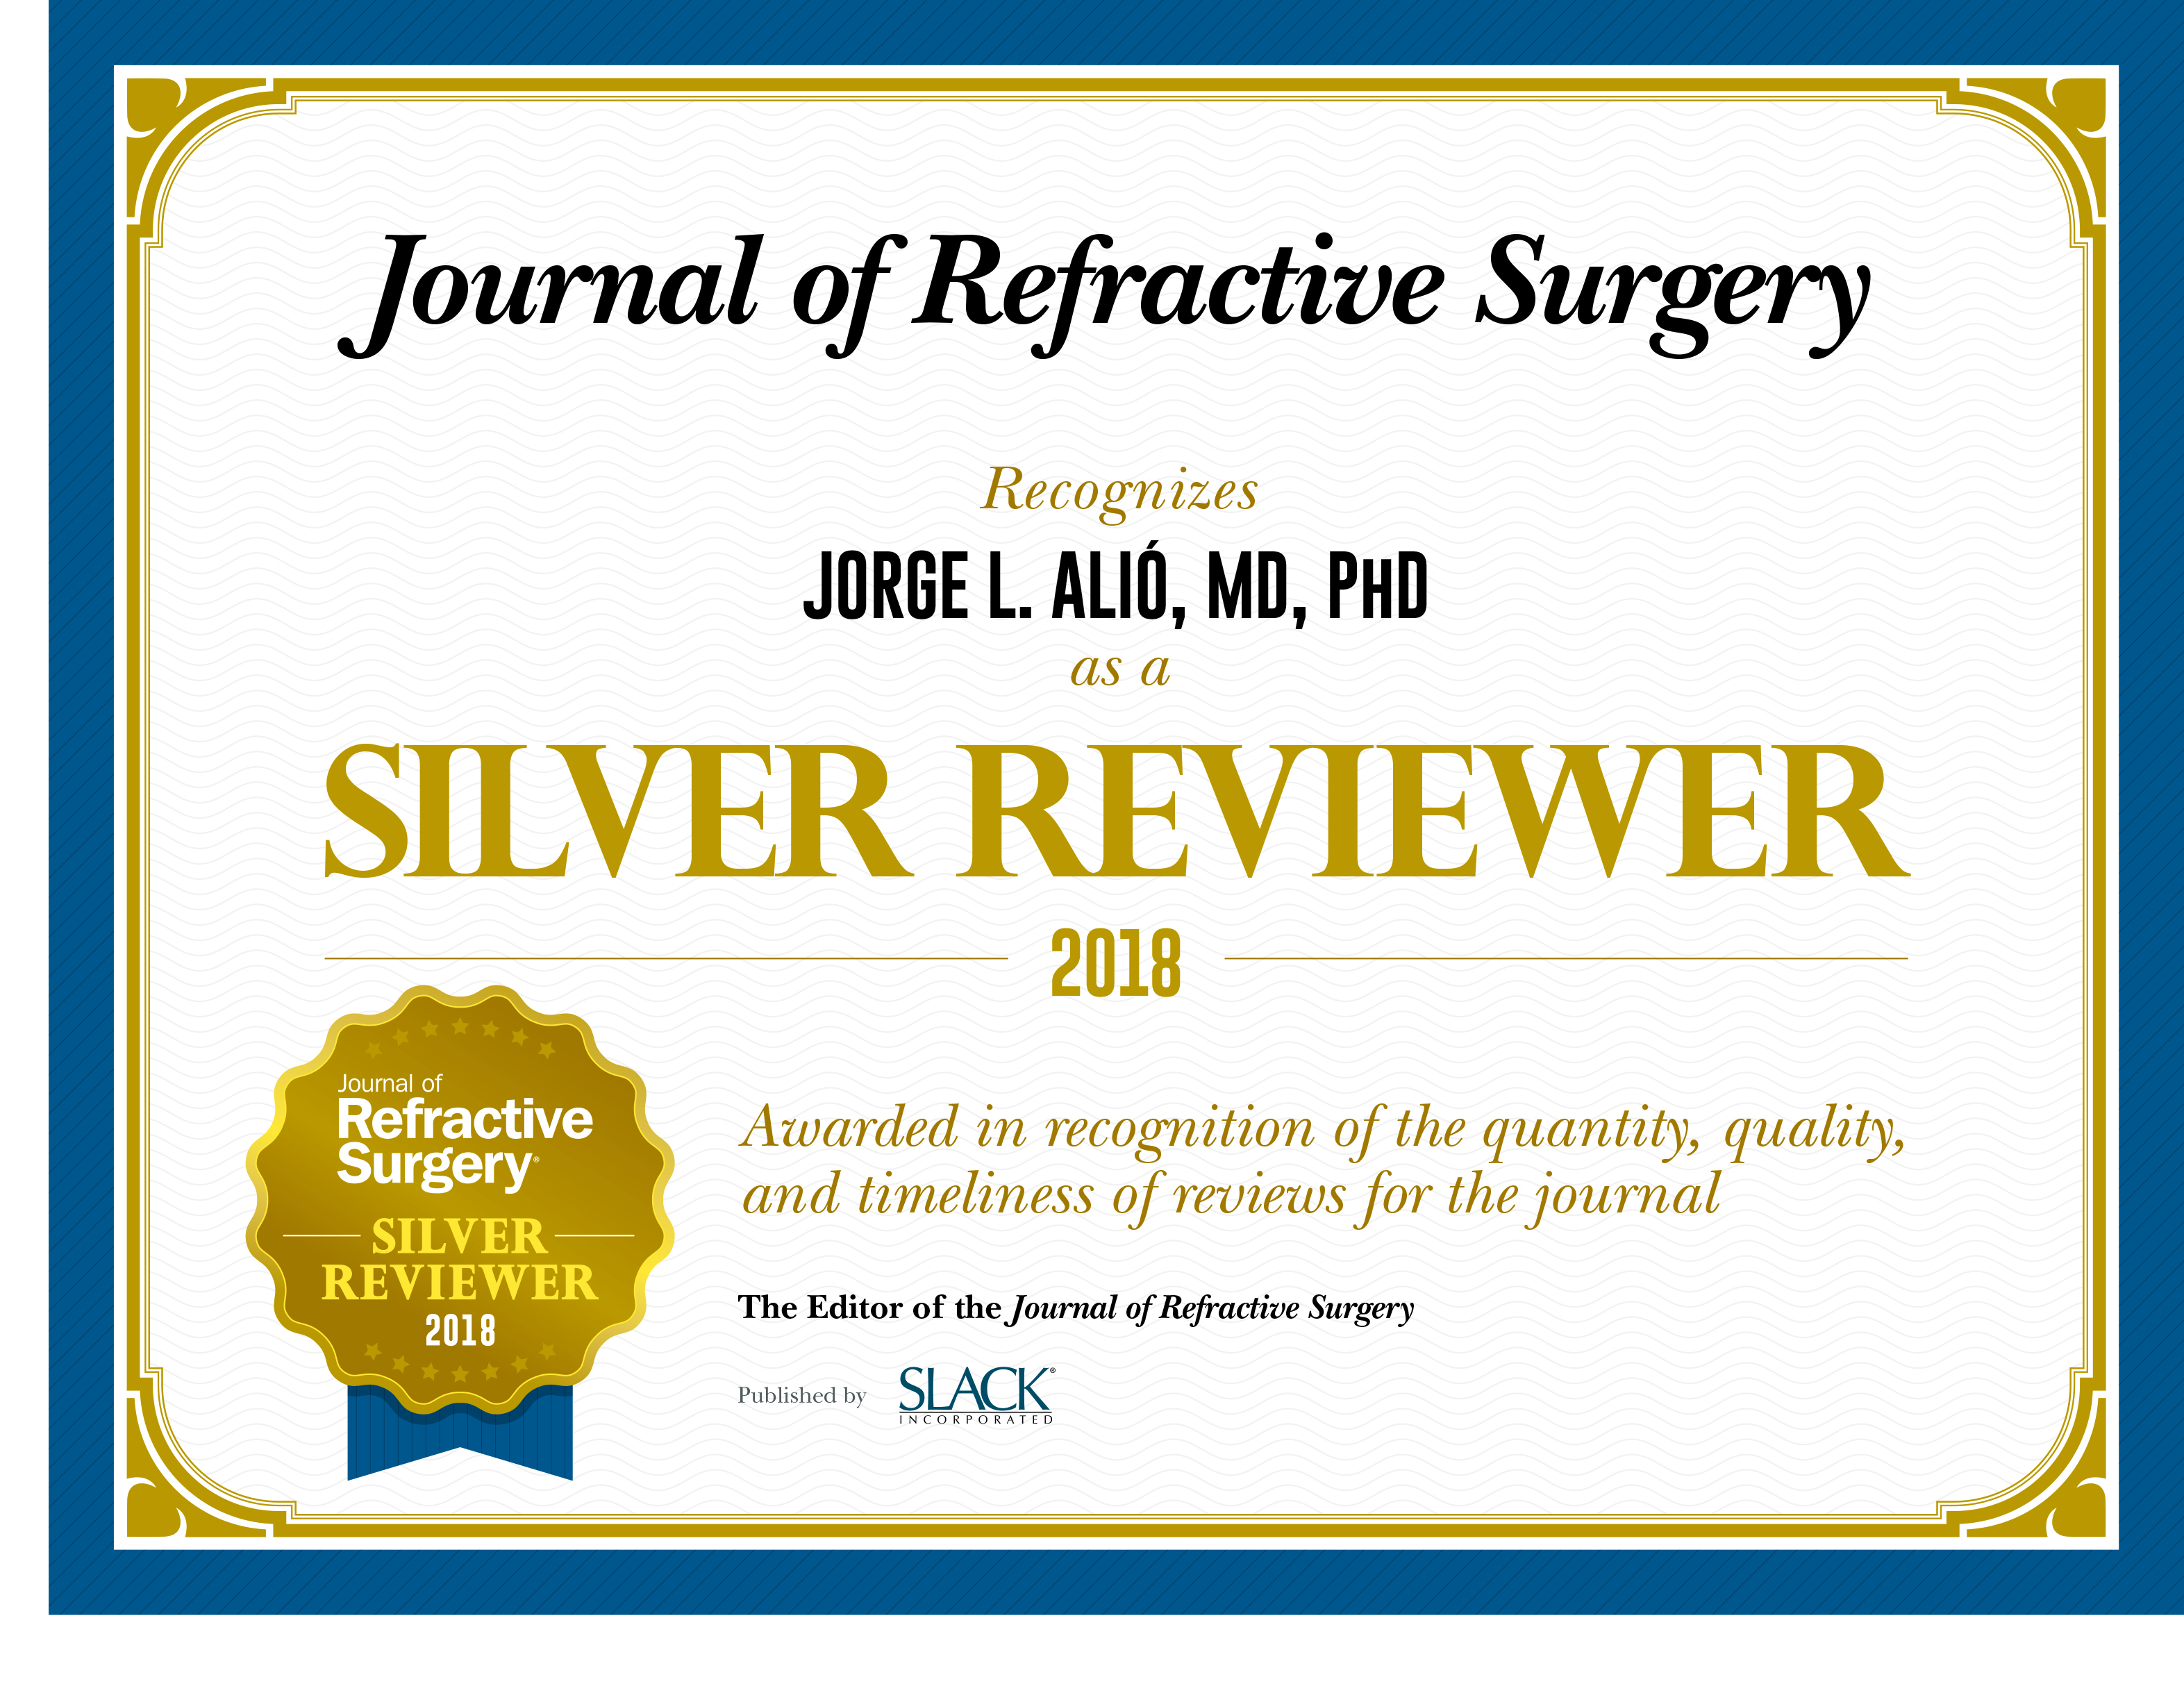 Silver Reviewer 2018 of The Journal of Refractive Surgery